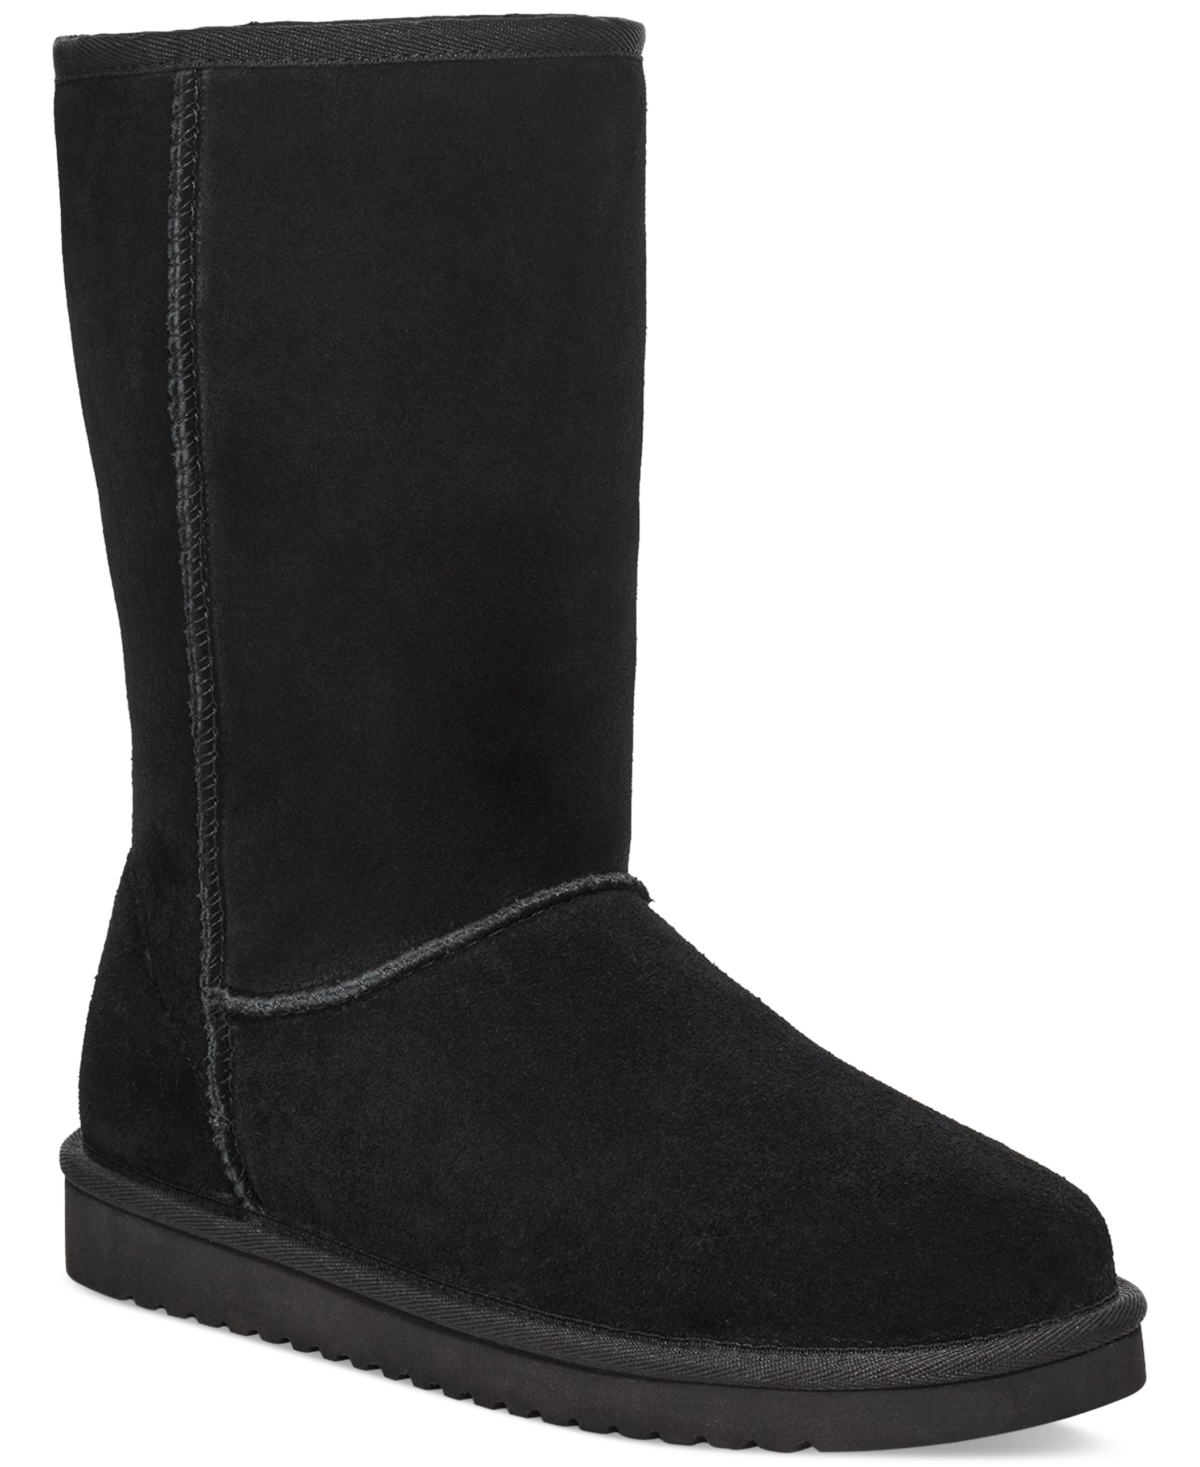 Women's Classic Tall Boots - Cappuccino